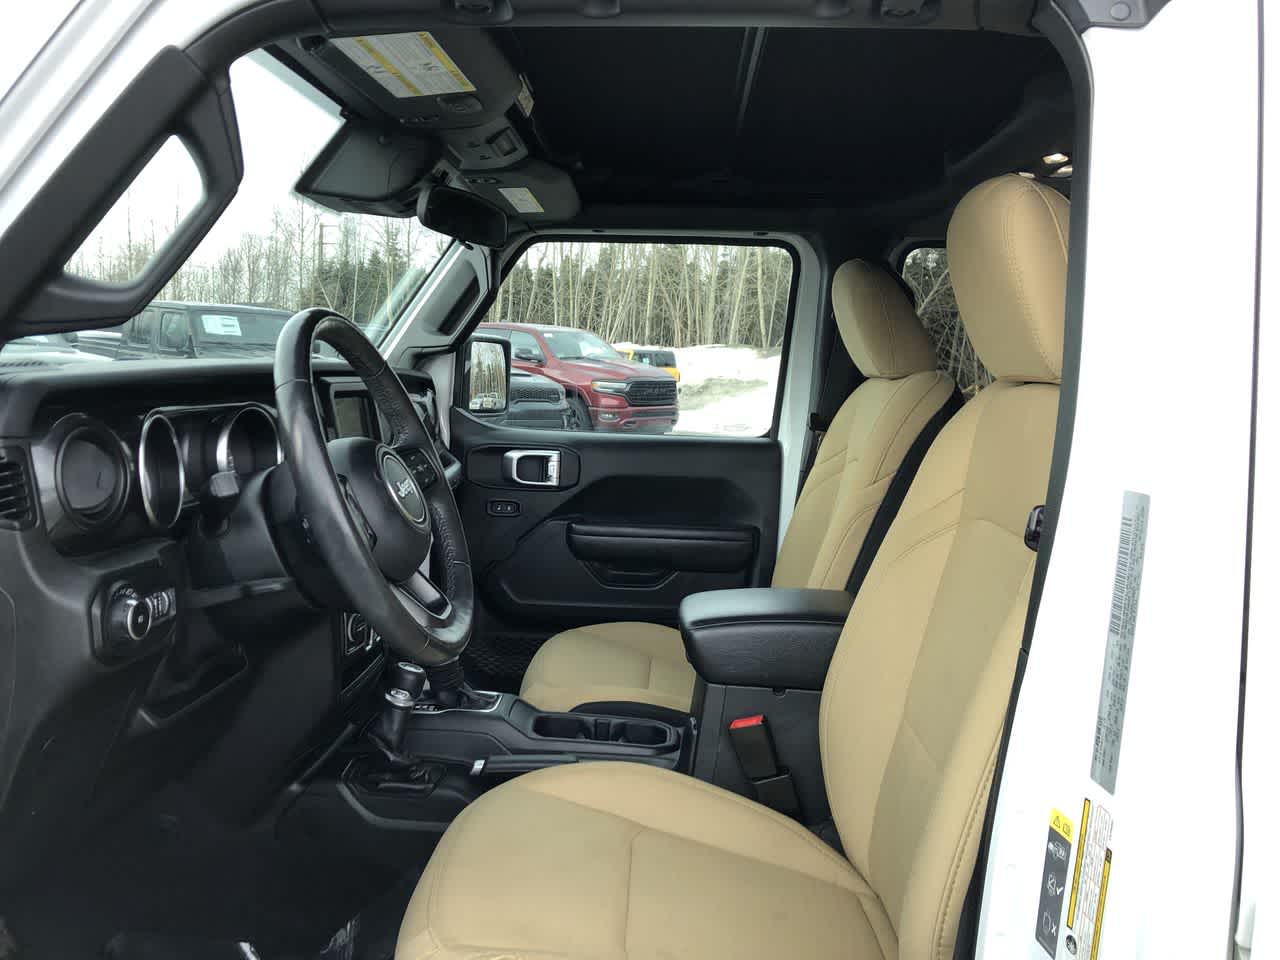 2020 Jeep Wrangler Unlimited Black and Tan 22